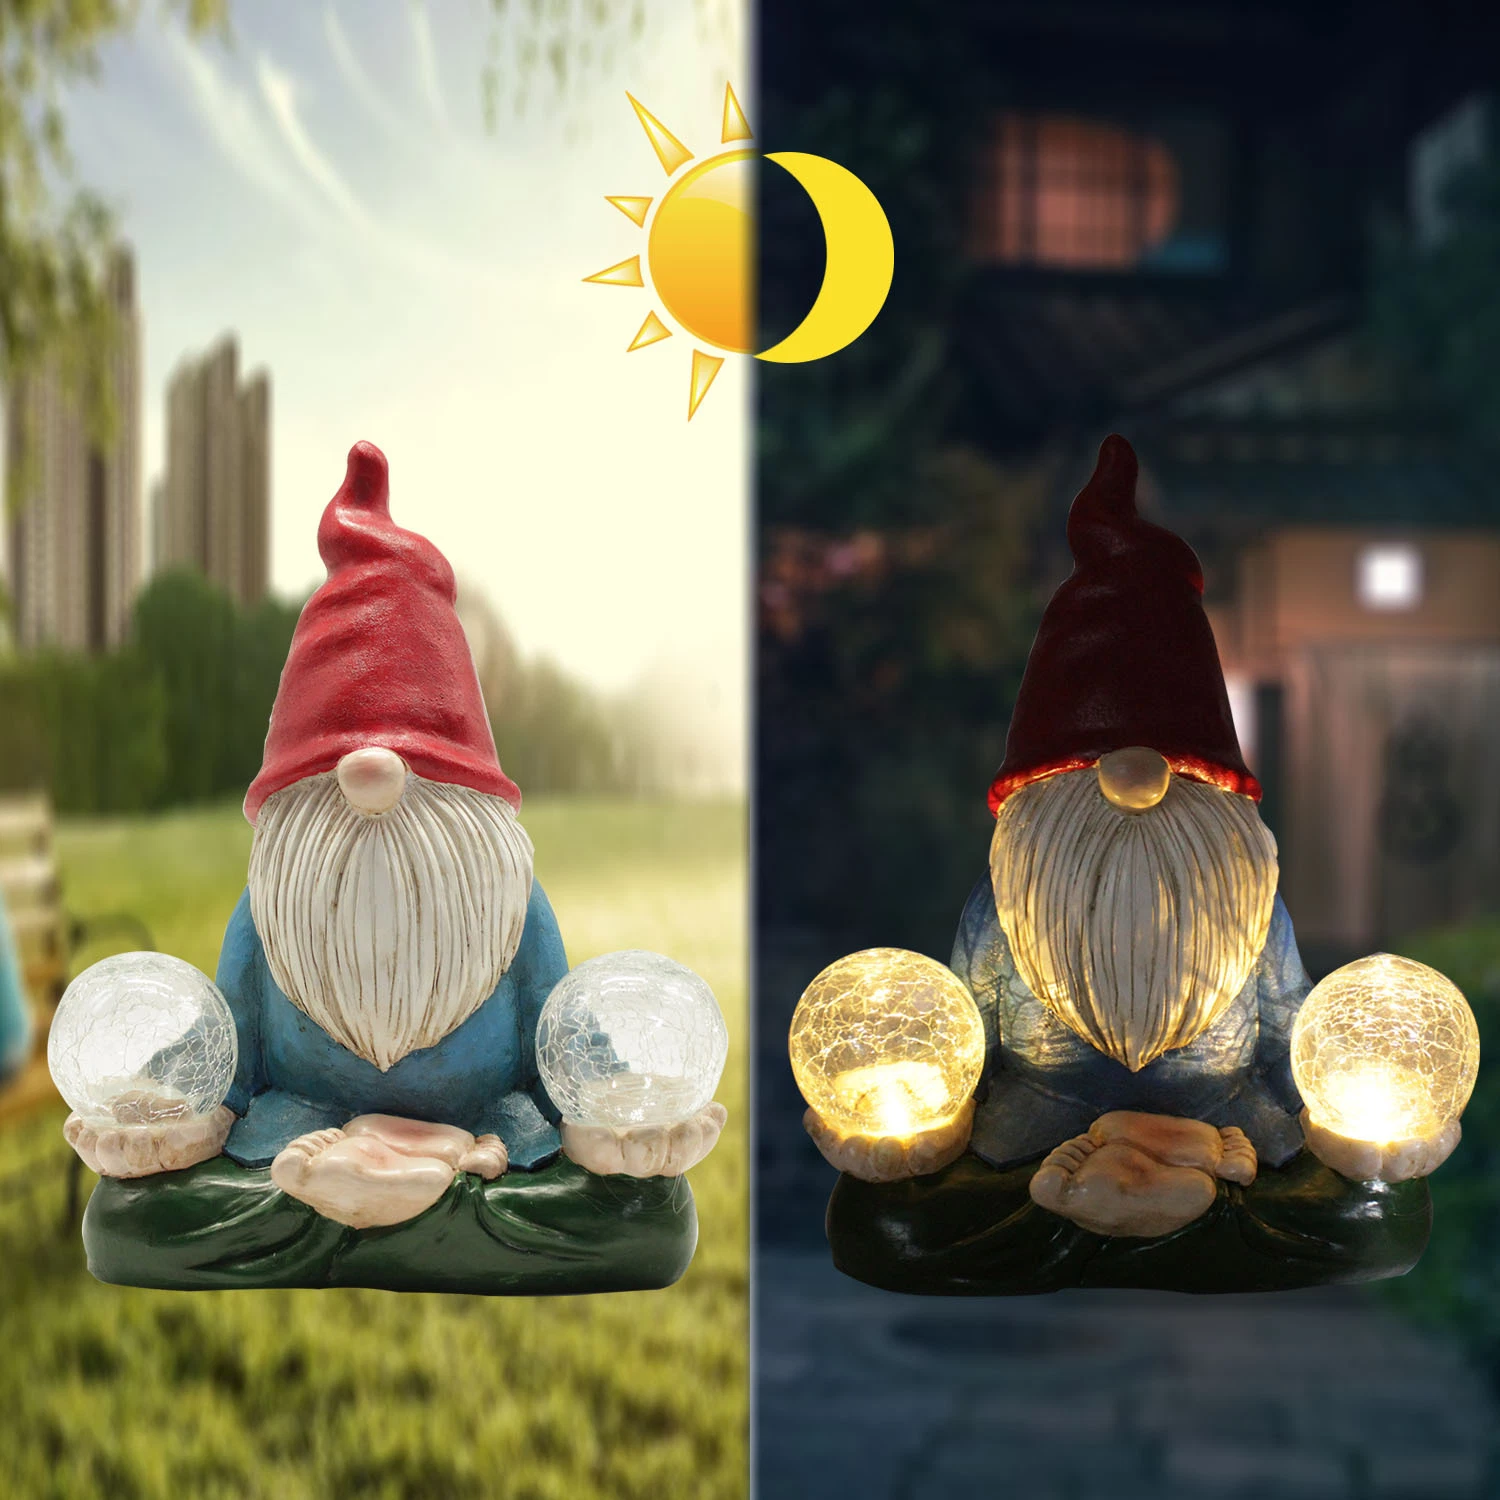 Wholesale Solar Powered LED Poly Resin Holding Double Balls Gnome Landscape Lighting Outdoor Garden Holiday Decoration Yard Decoration